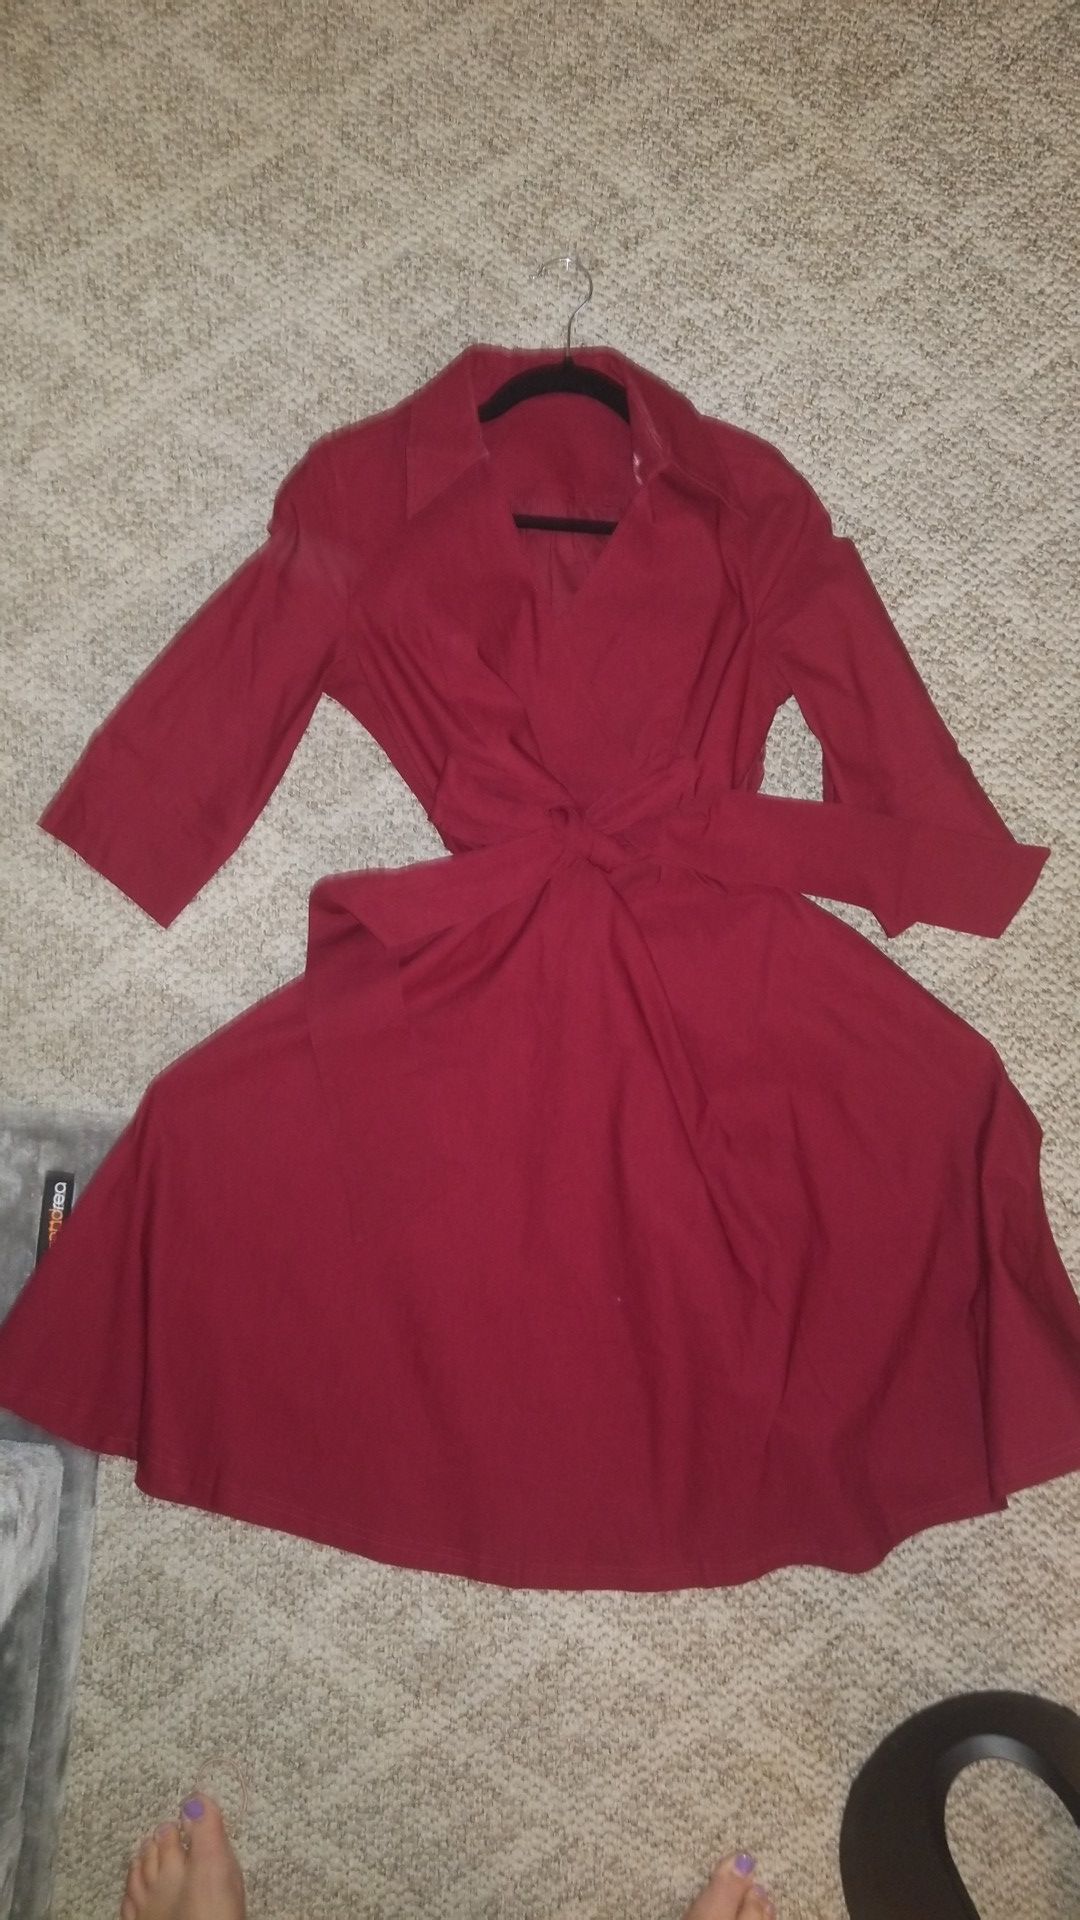 vintage 1950s red dress size Xl or 0x